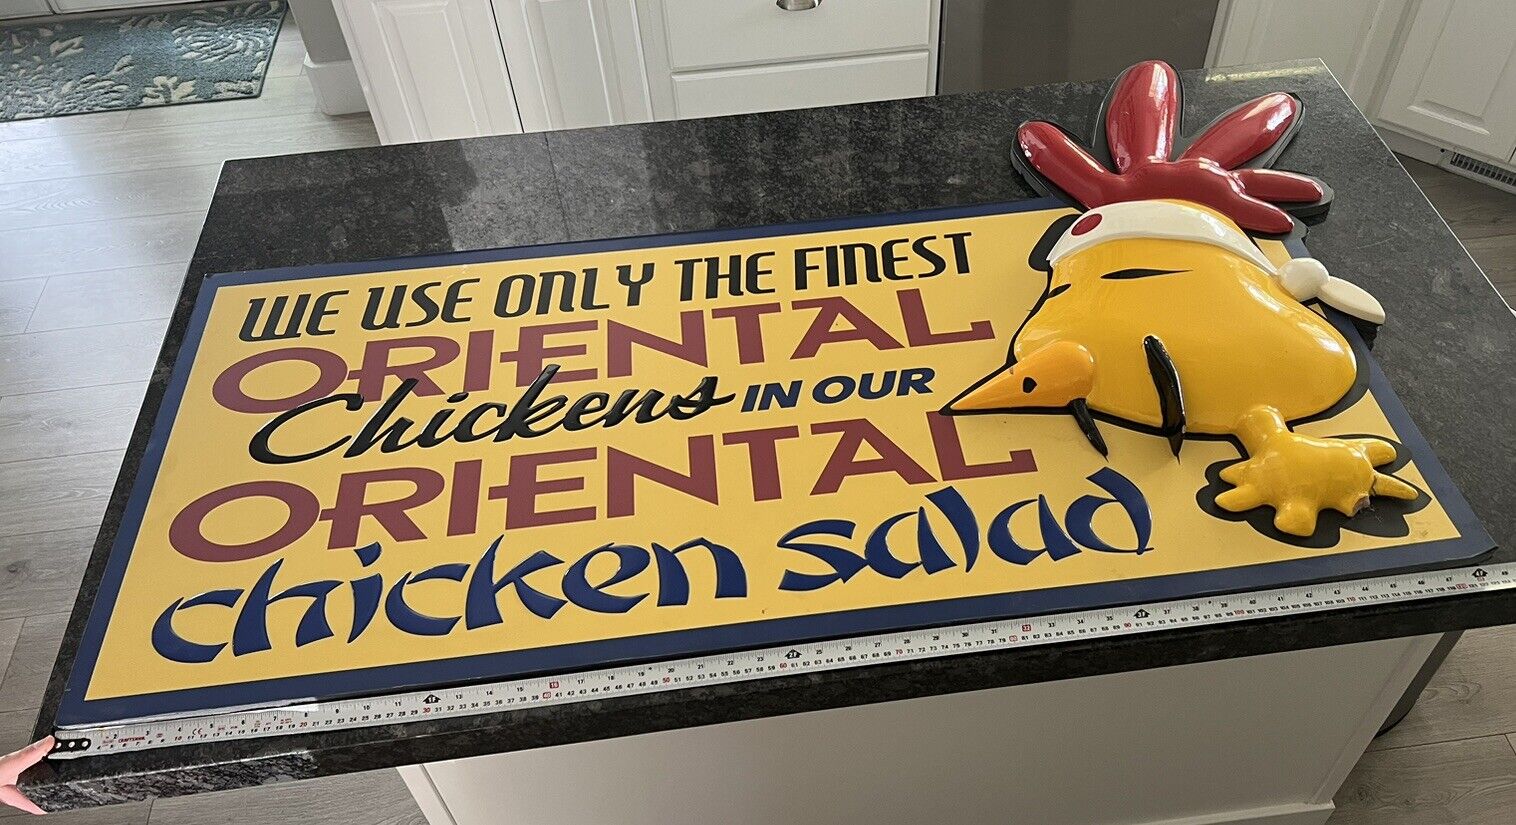 RARE ADVERTISING ONLY THE FINEST ORIENTAL CHICKENS IN OUR ORIENTAL CHICKEN SALAD